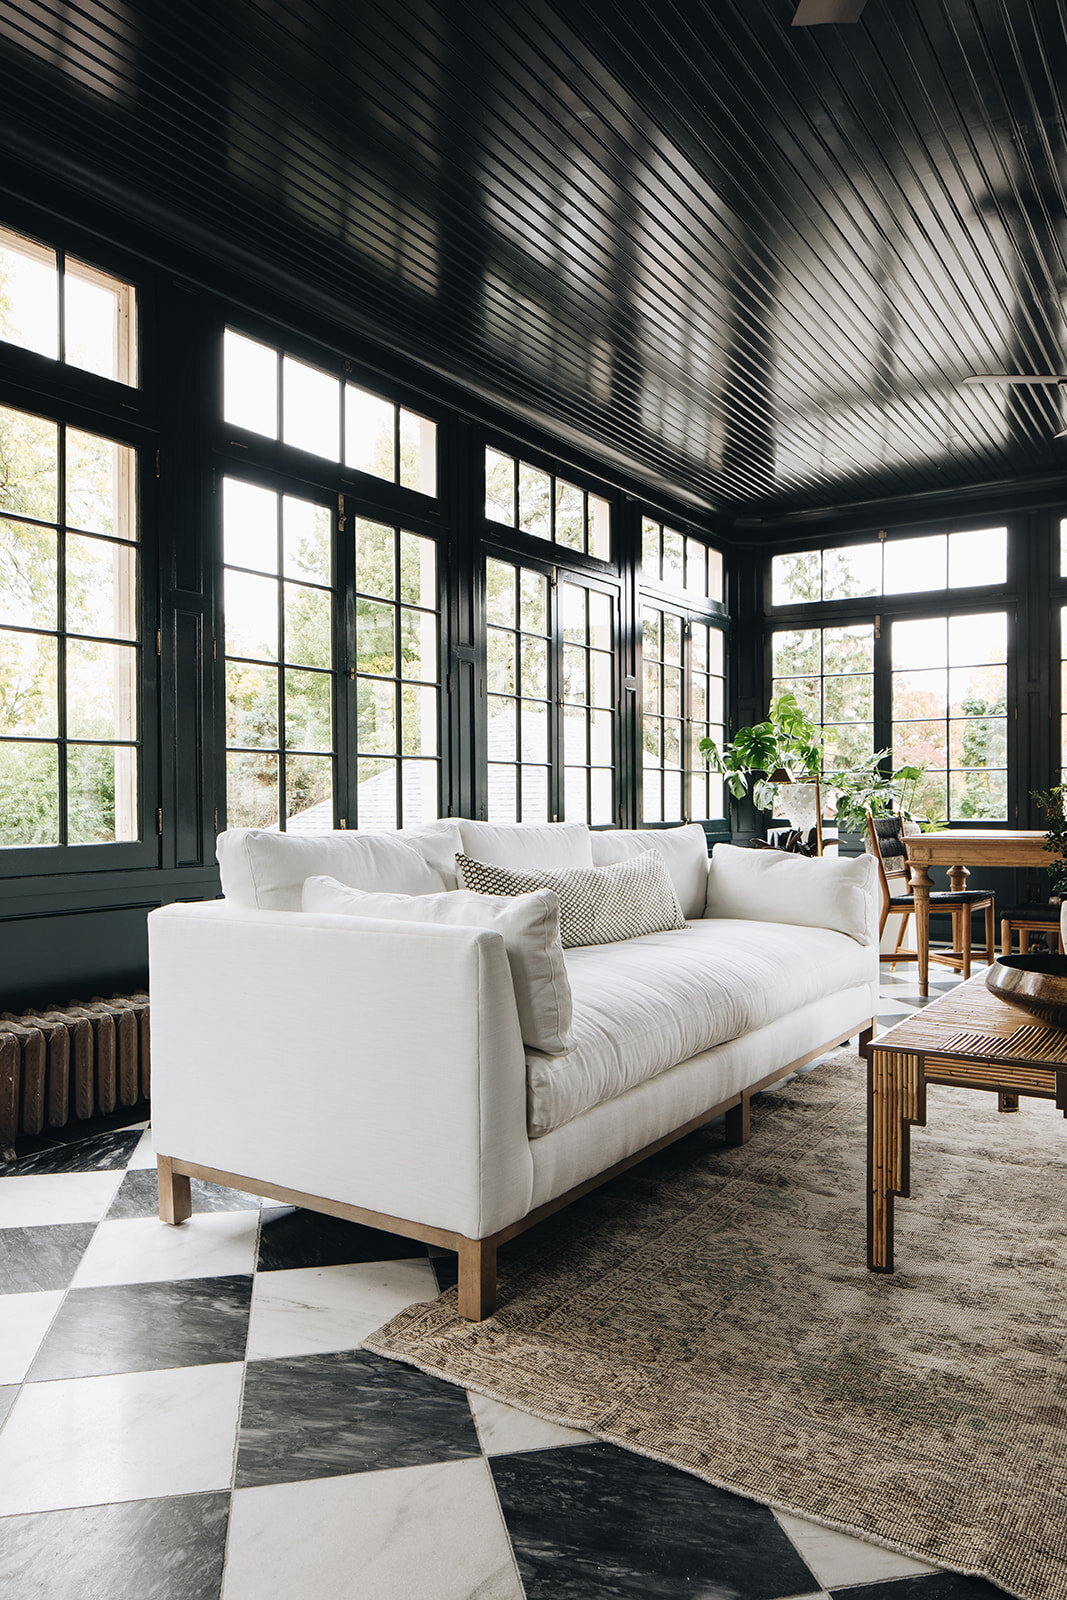 When Can I Move In? | lark & linen